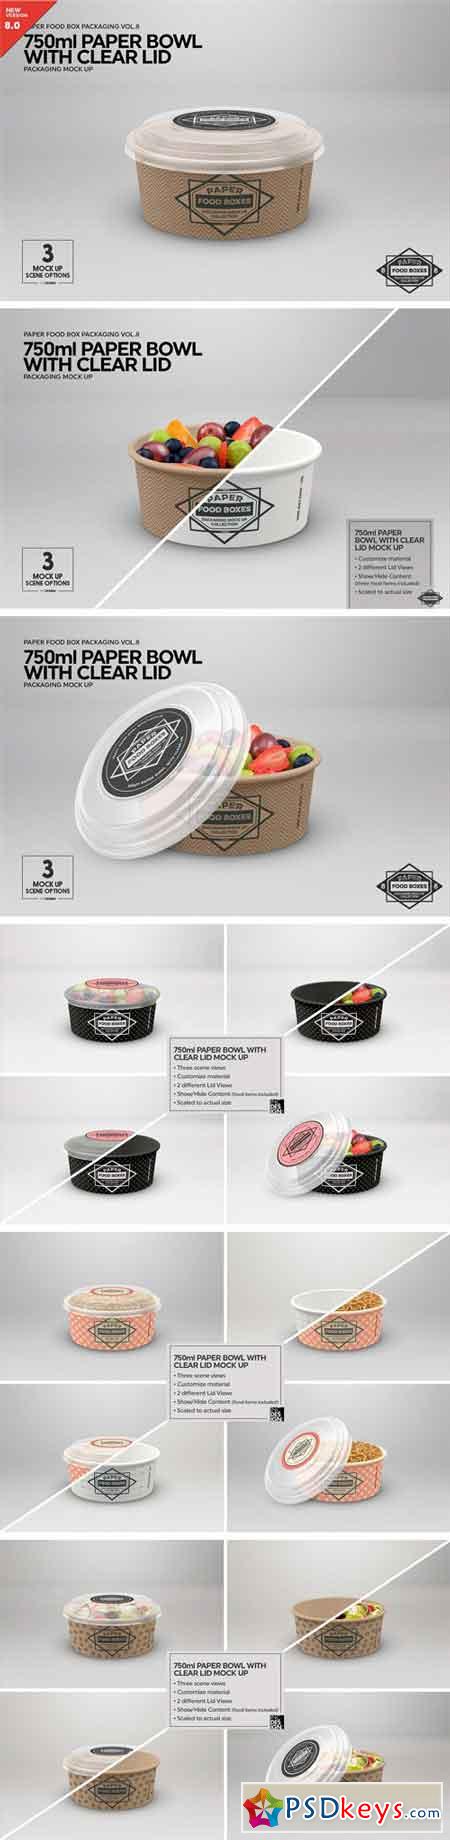 Download 750ml Paper Bowl Clear Lid Mockup 2181787 Free Download Photoshop Vector Stock Image Via Torrent Zippyshare From Psdkeys Com